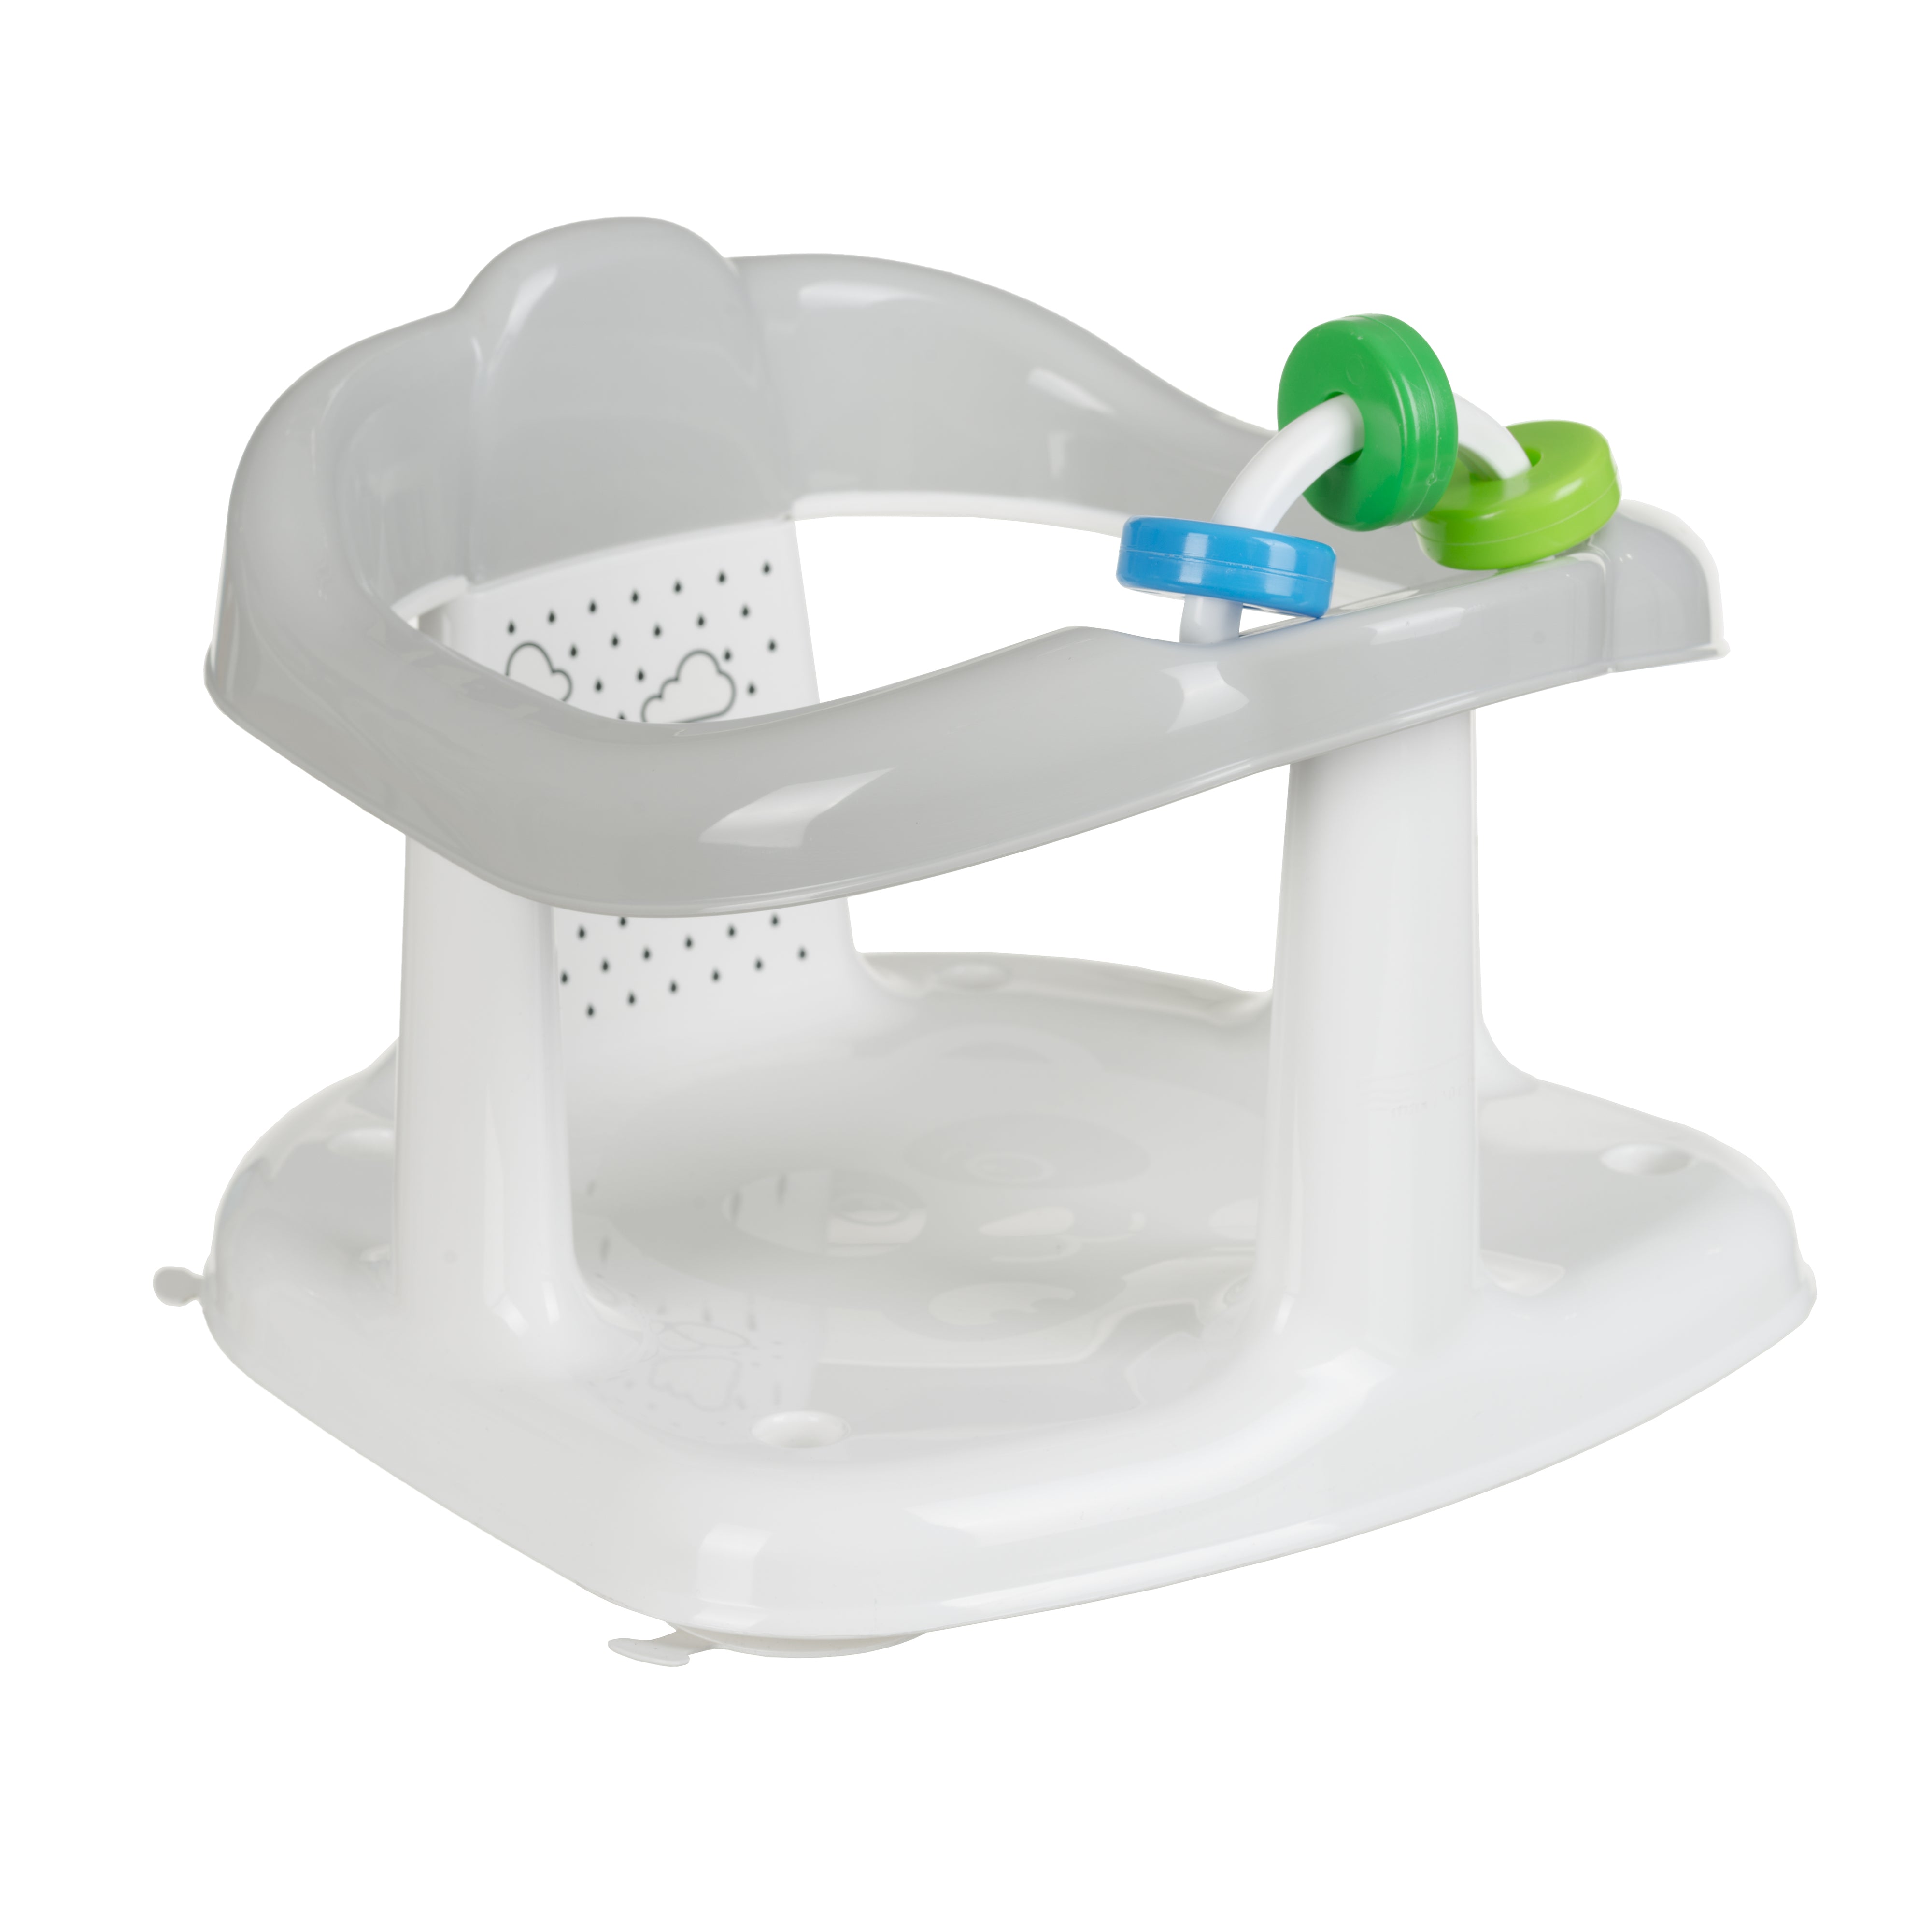 Euro Baby PANDA bath ring with toys - ergonomic design, suction cup stability, and colorful wheel toy, perfect for babies 7 months and up. Available in South Africa with CB Baby.